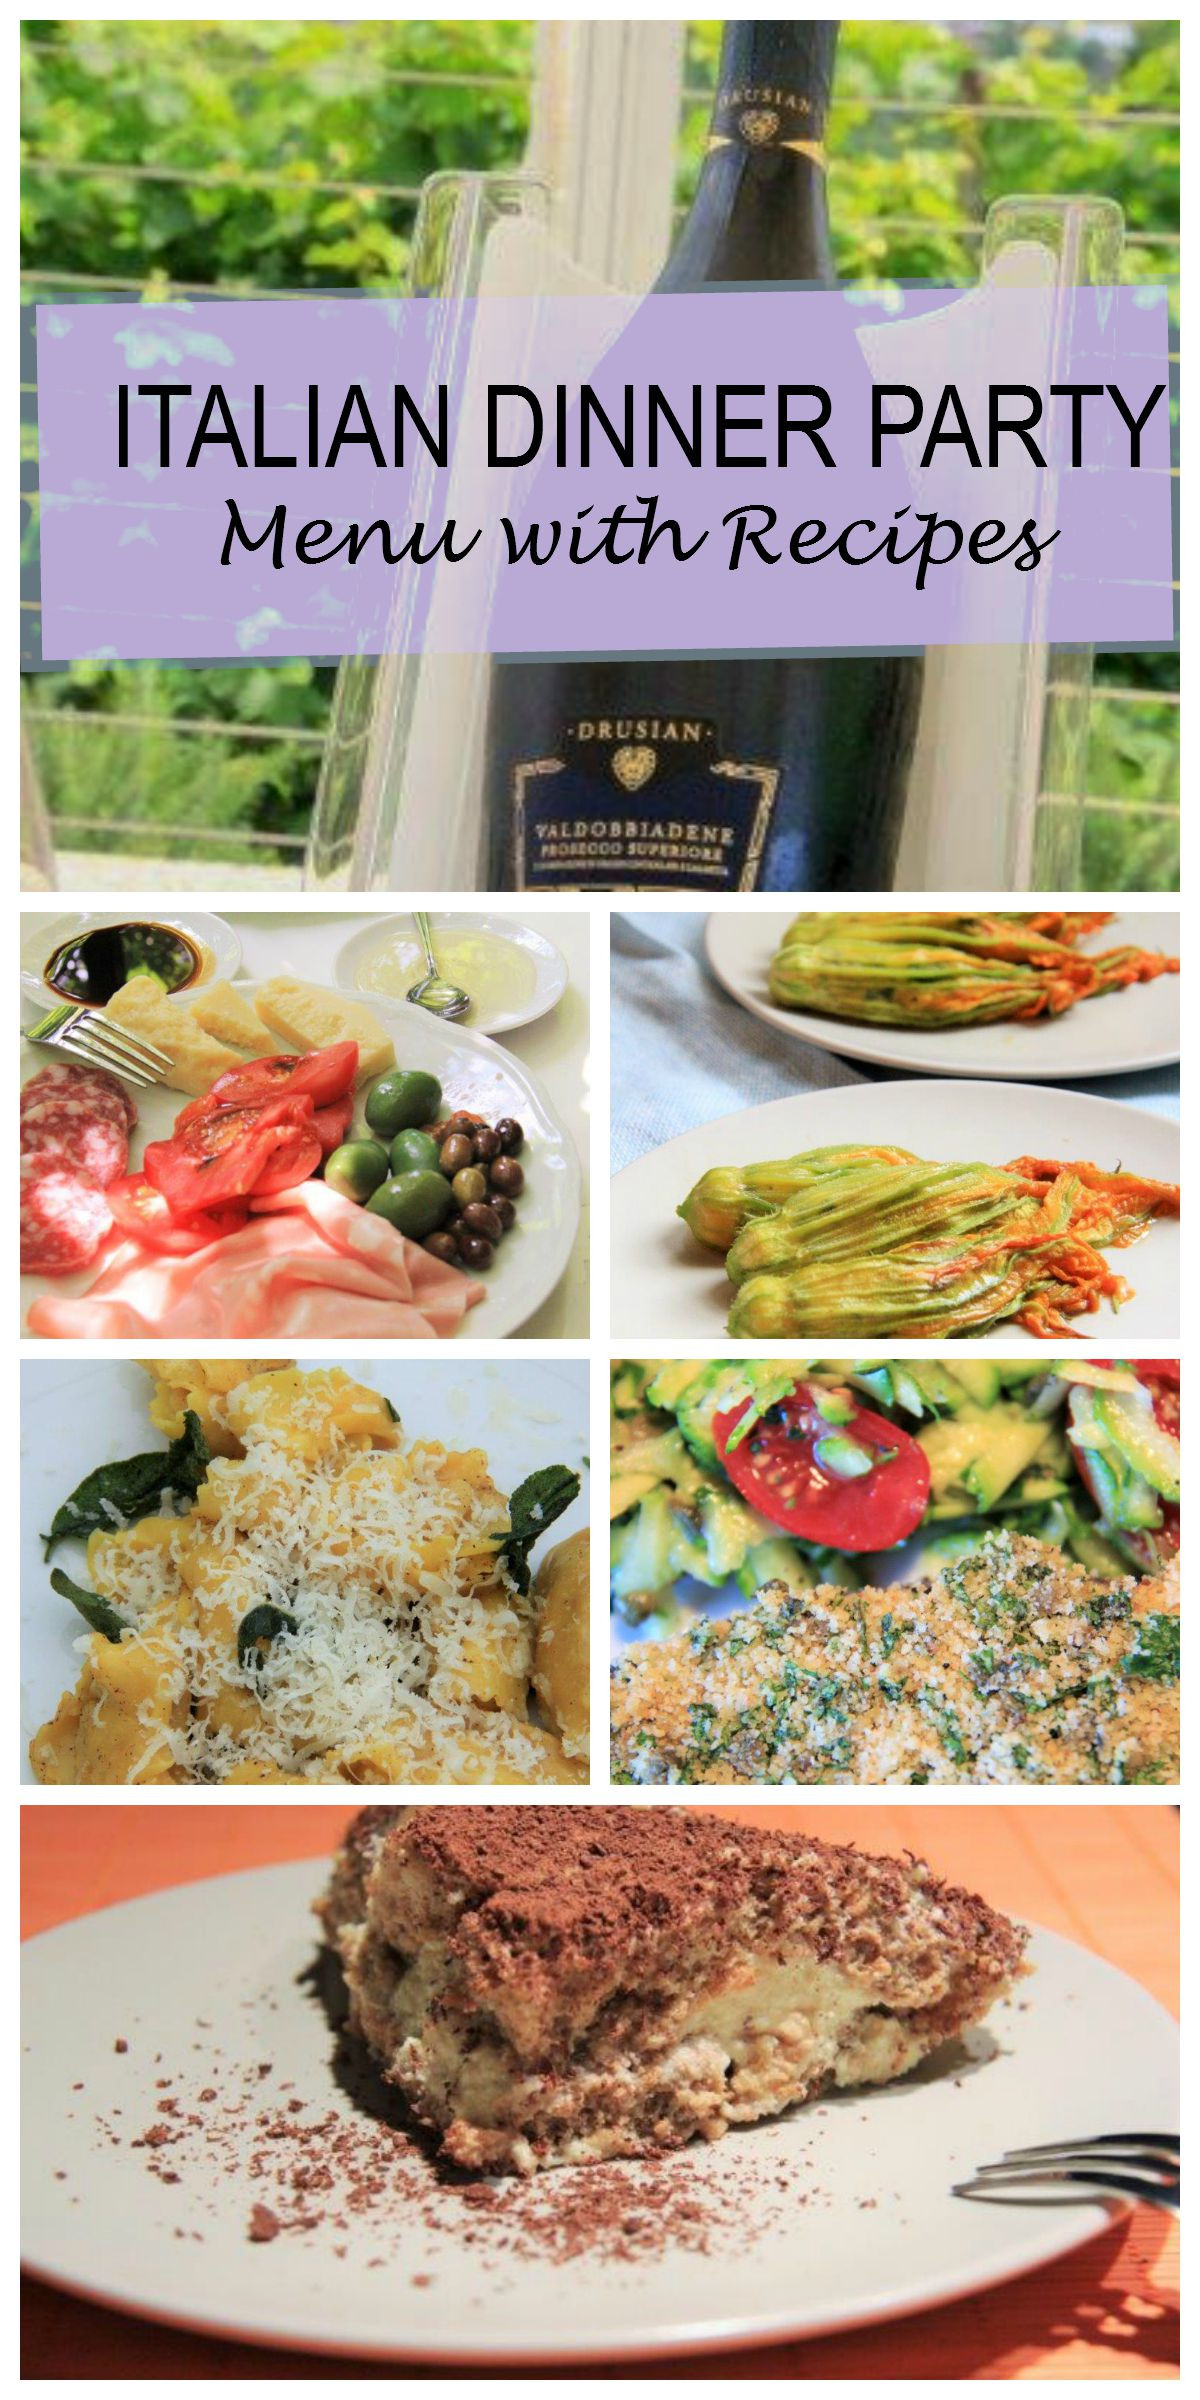 Dinner Party Menu Ideas
 Italian Dinner Party Menu plete with Recipes for Easy